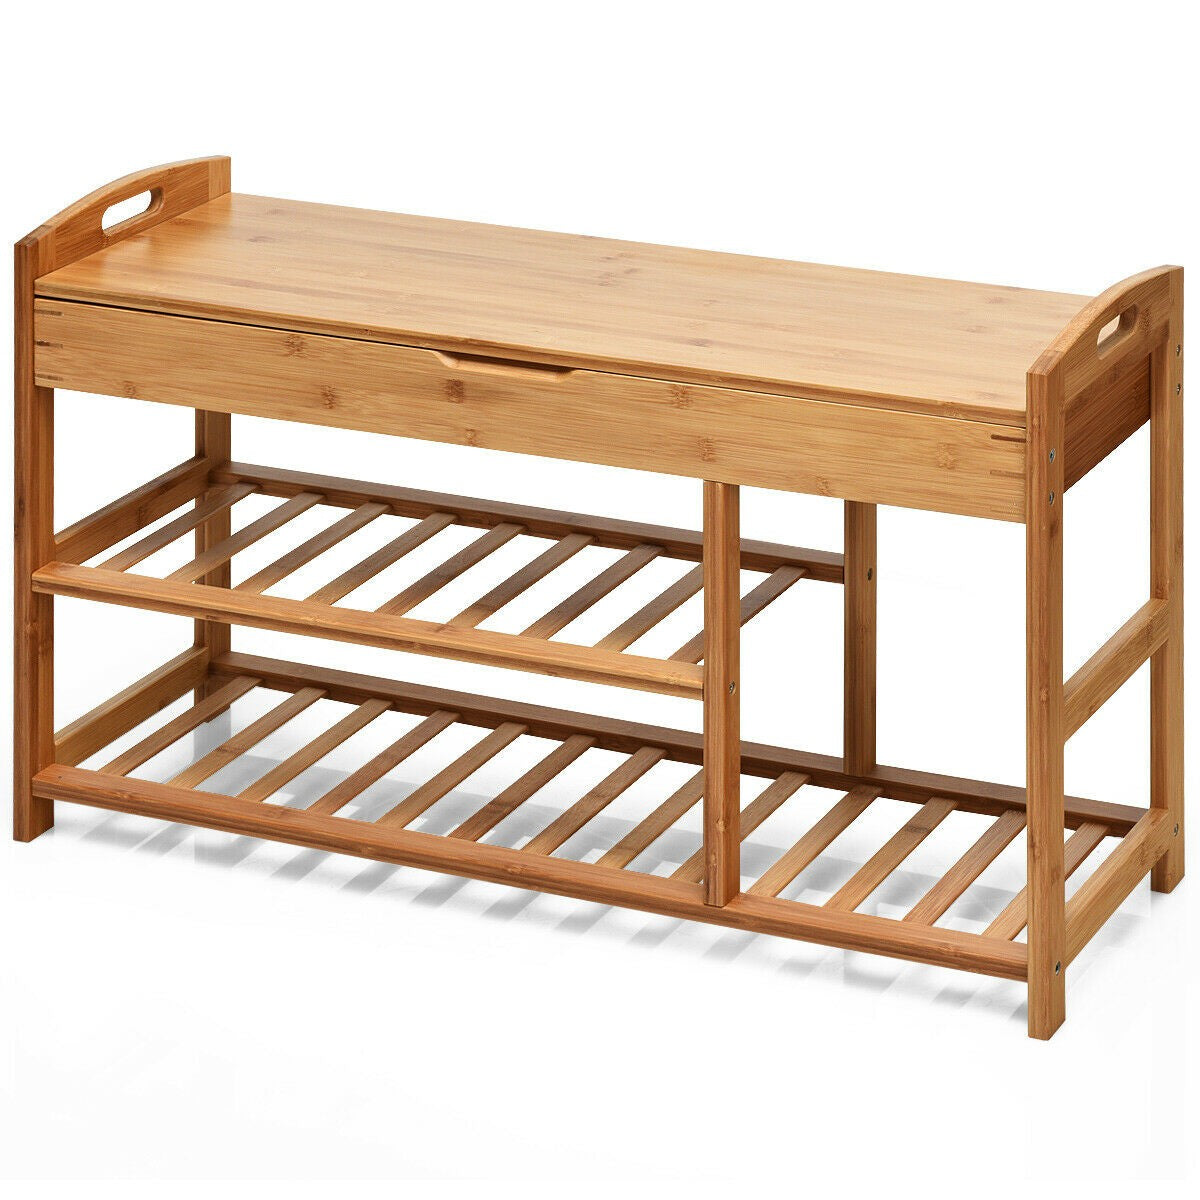 Giantex Shoe Bench Entryway with storage Bamboo 3-Tier W/ Openable Seat and Shelves